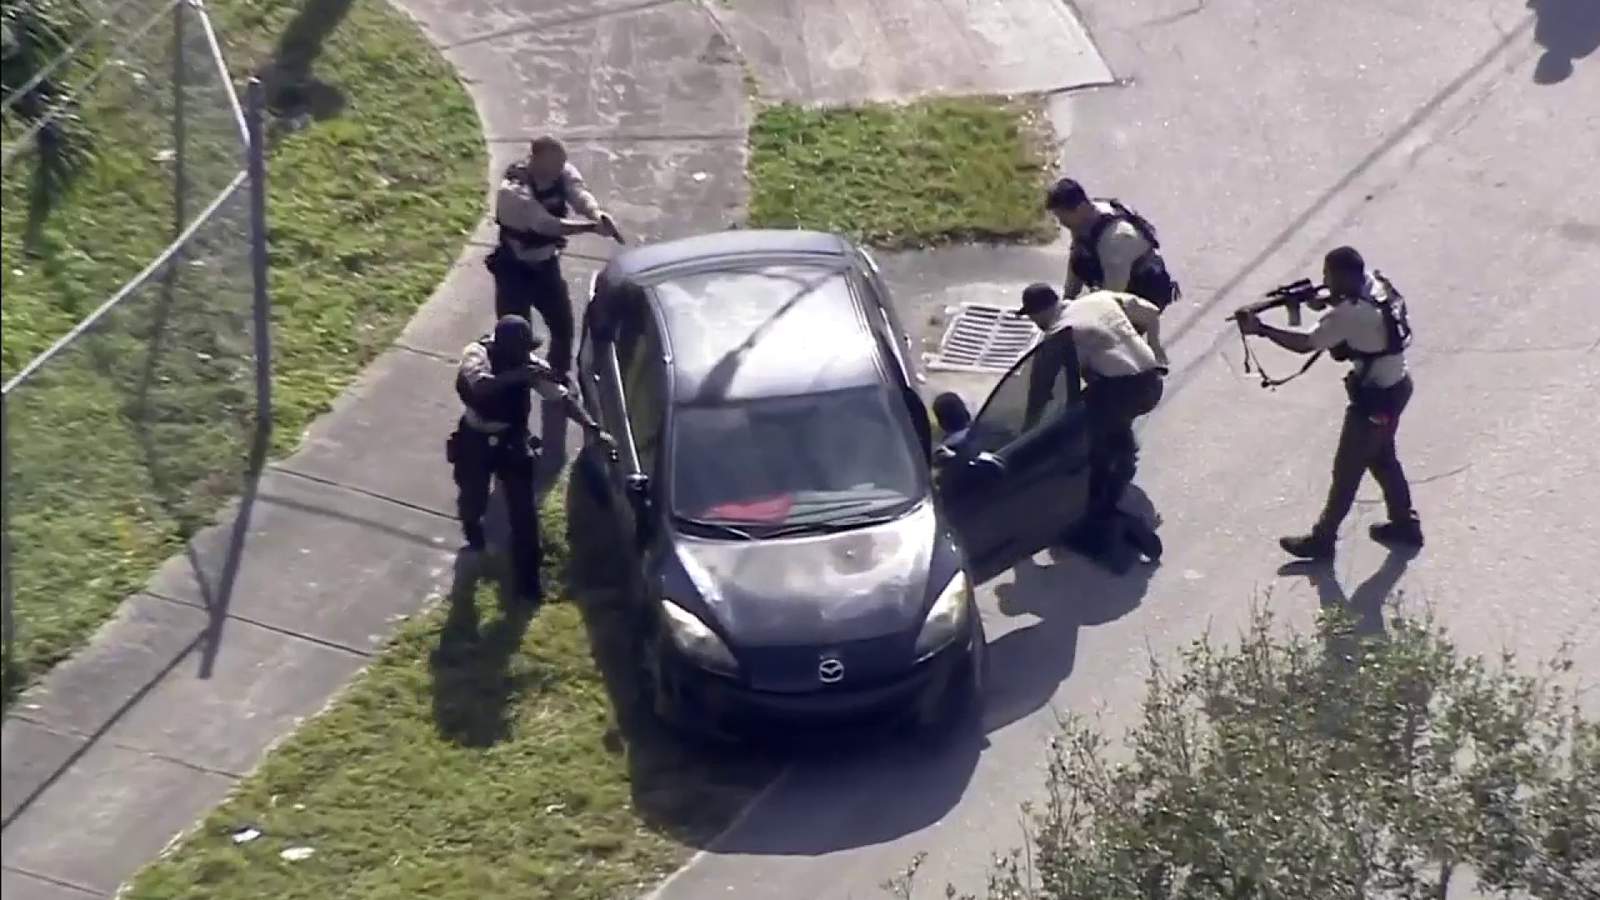 WATCH: High-speed chase in South Florida ends with carjacking suspect in custody